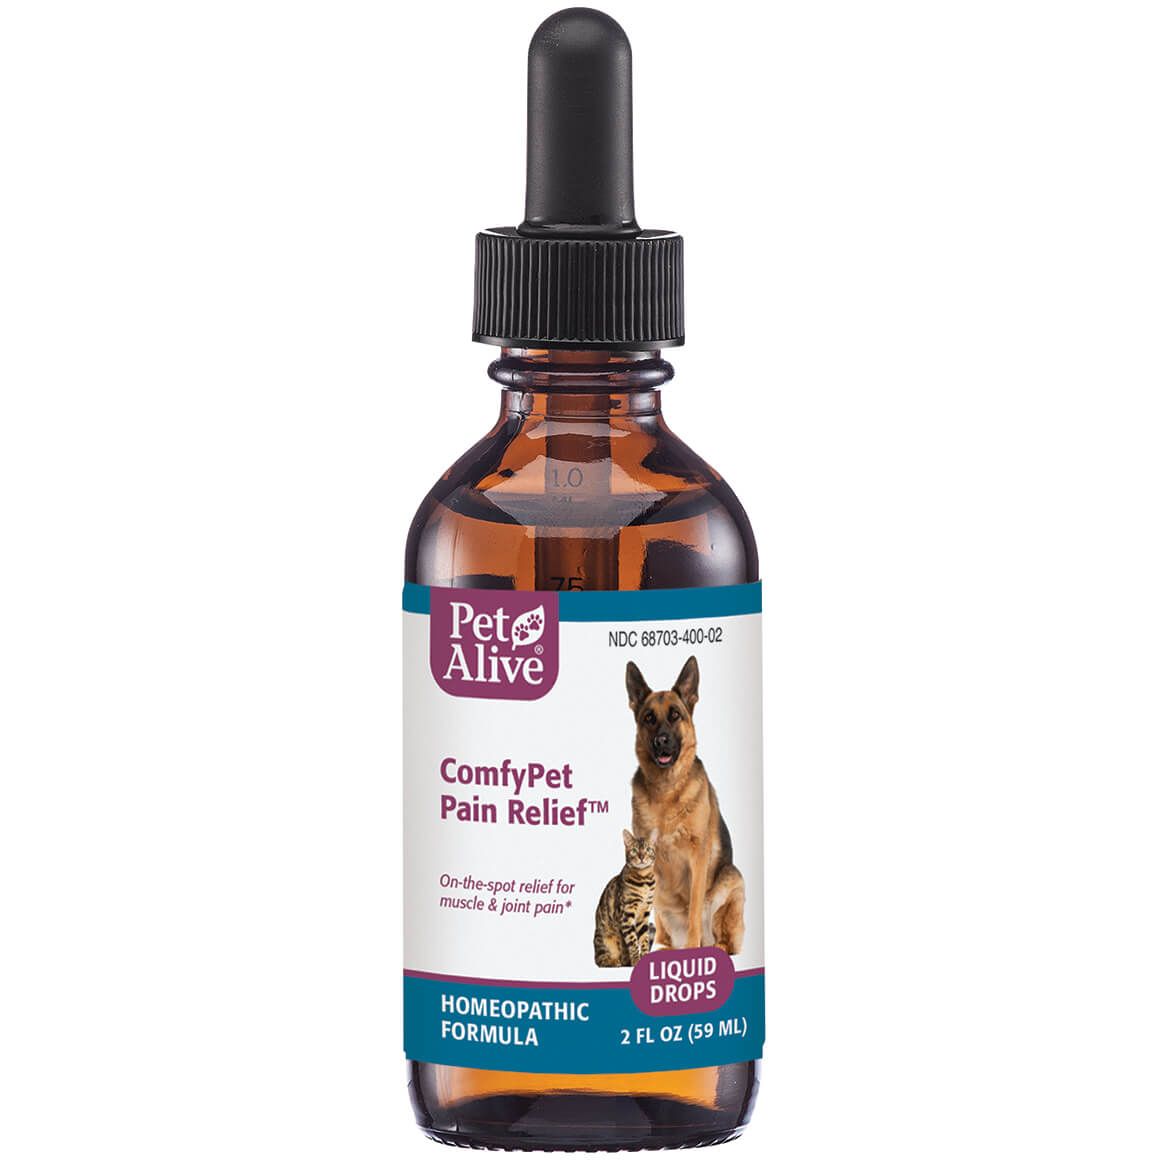 ComfyPet Pain Relief™ for Minor Aches & Pain + '-' + 352062